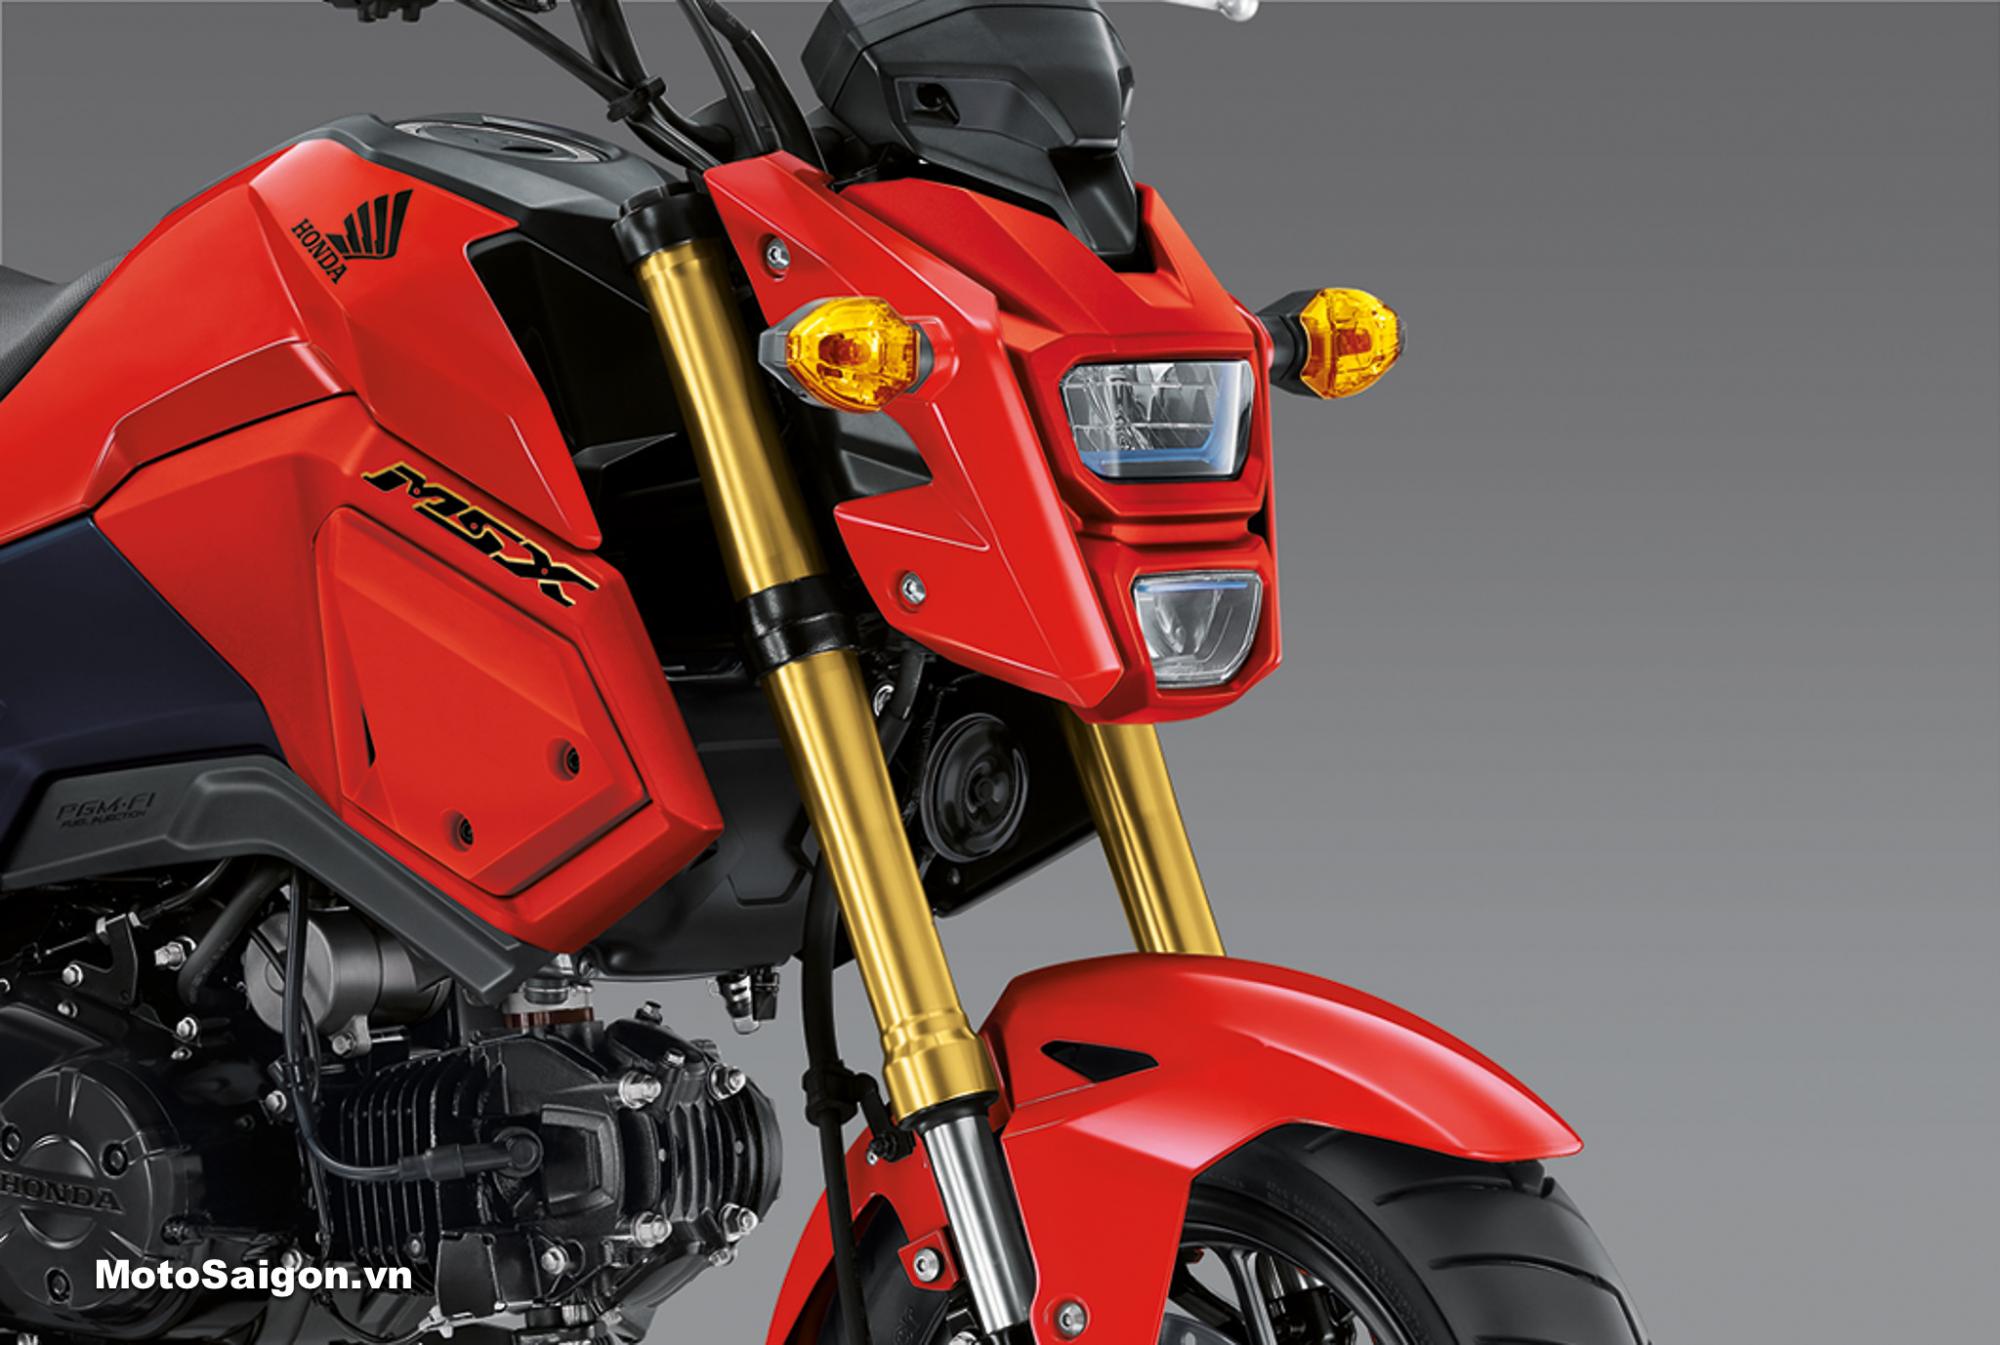 New Honda MSX 125 revealed, to be launched in Vietnam next month